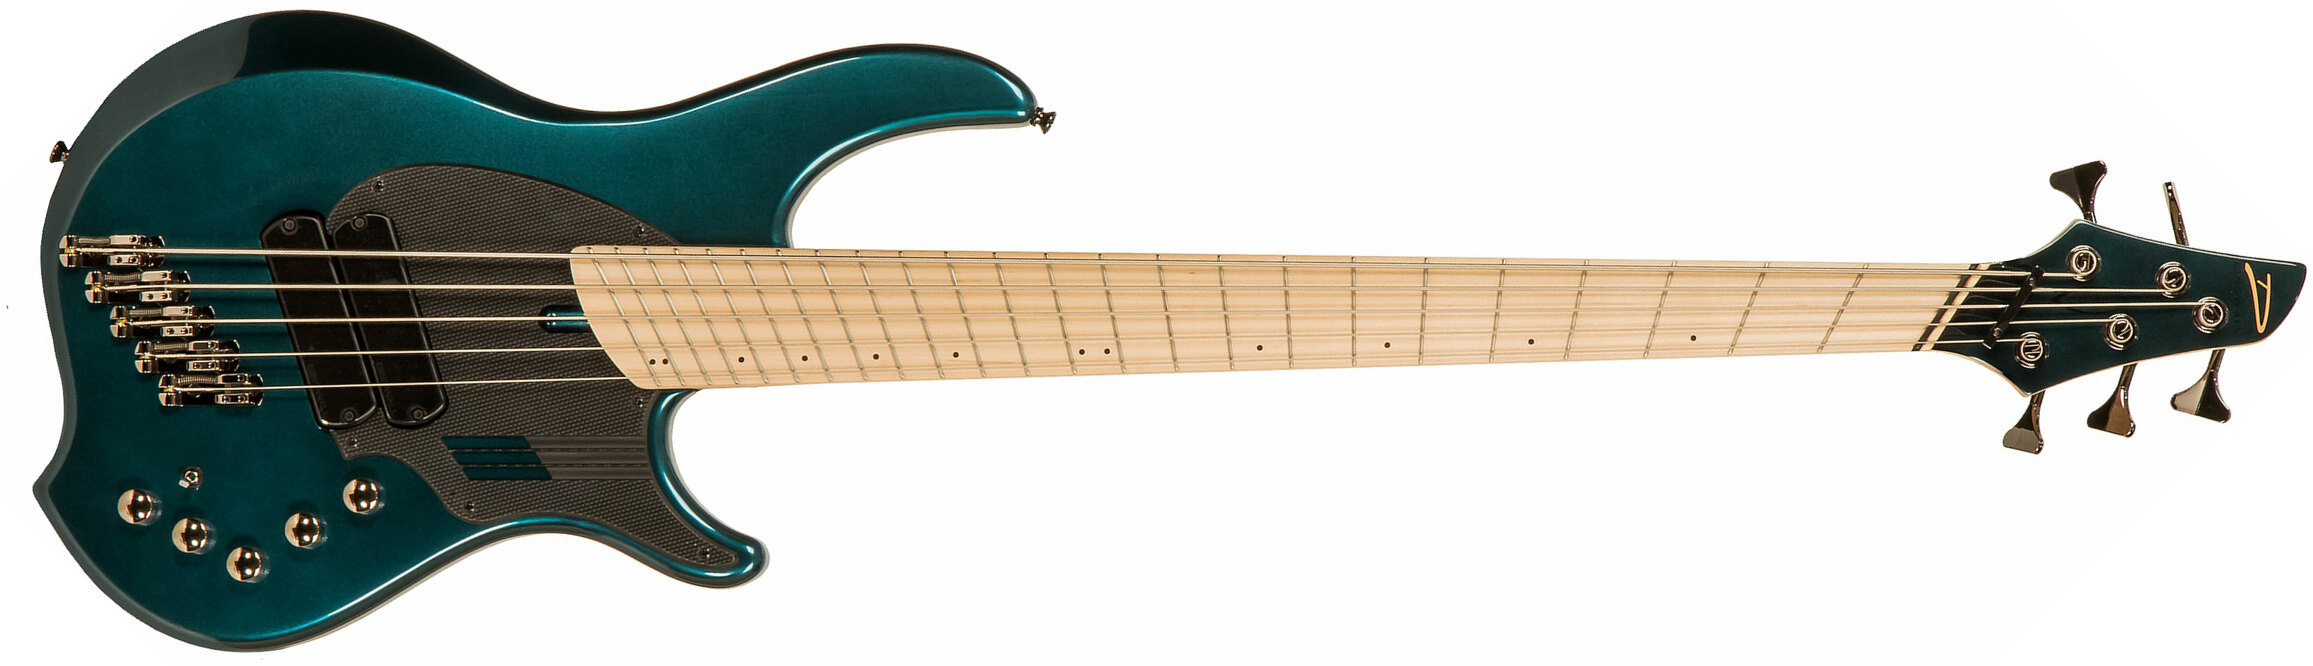 Dingwall Adam Nolly Getgood Ng2 5c Signature 2pu Active Mn - Black Forrest Green - Solidbody E-bass - Main picture